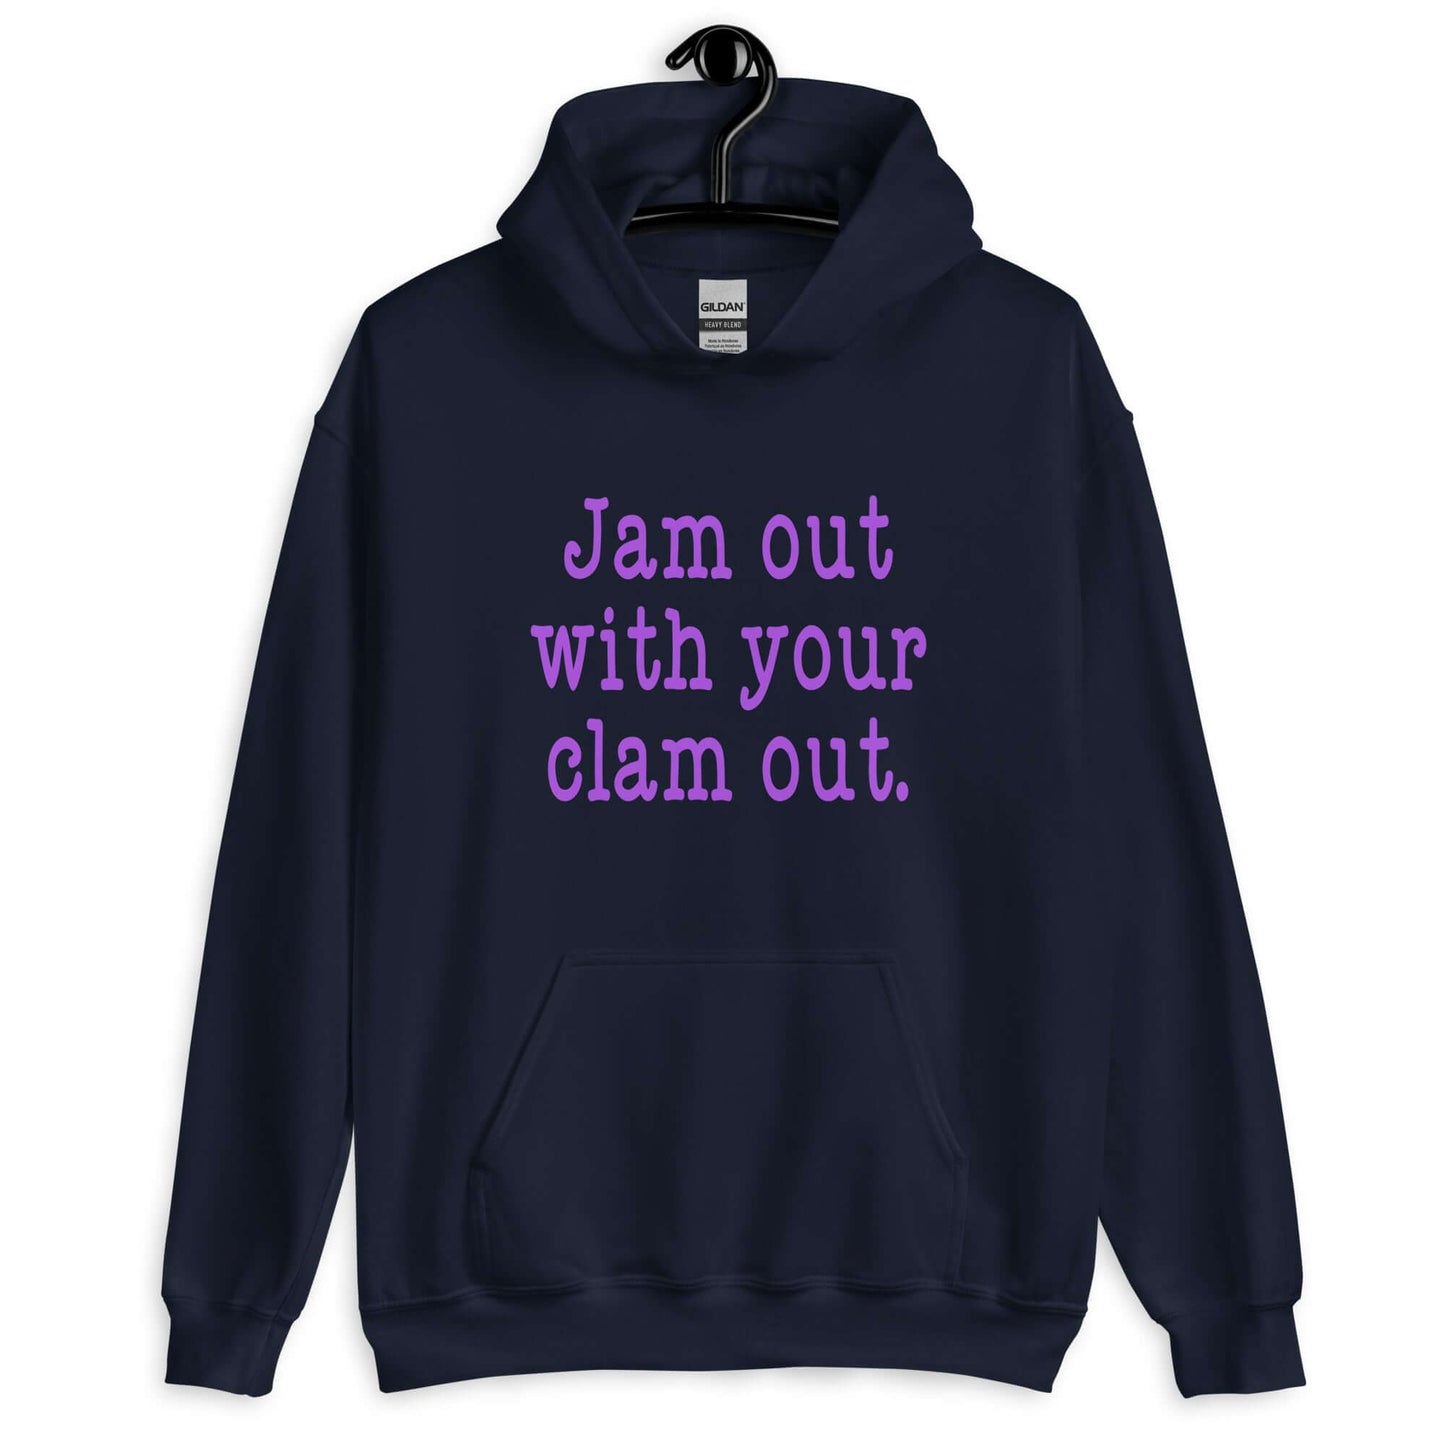 Navy blue hoodie sweatshirt with the phrase Jam out with your clam out printed on the front in purple.